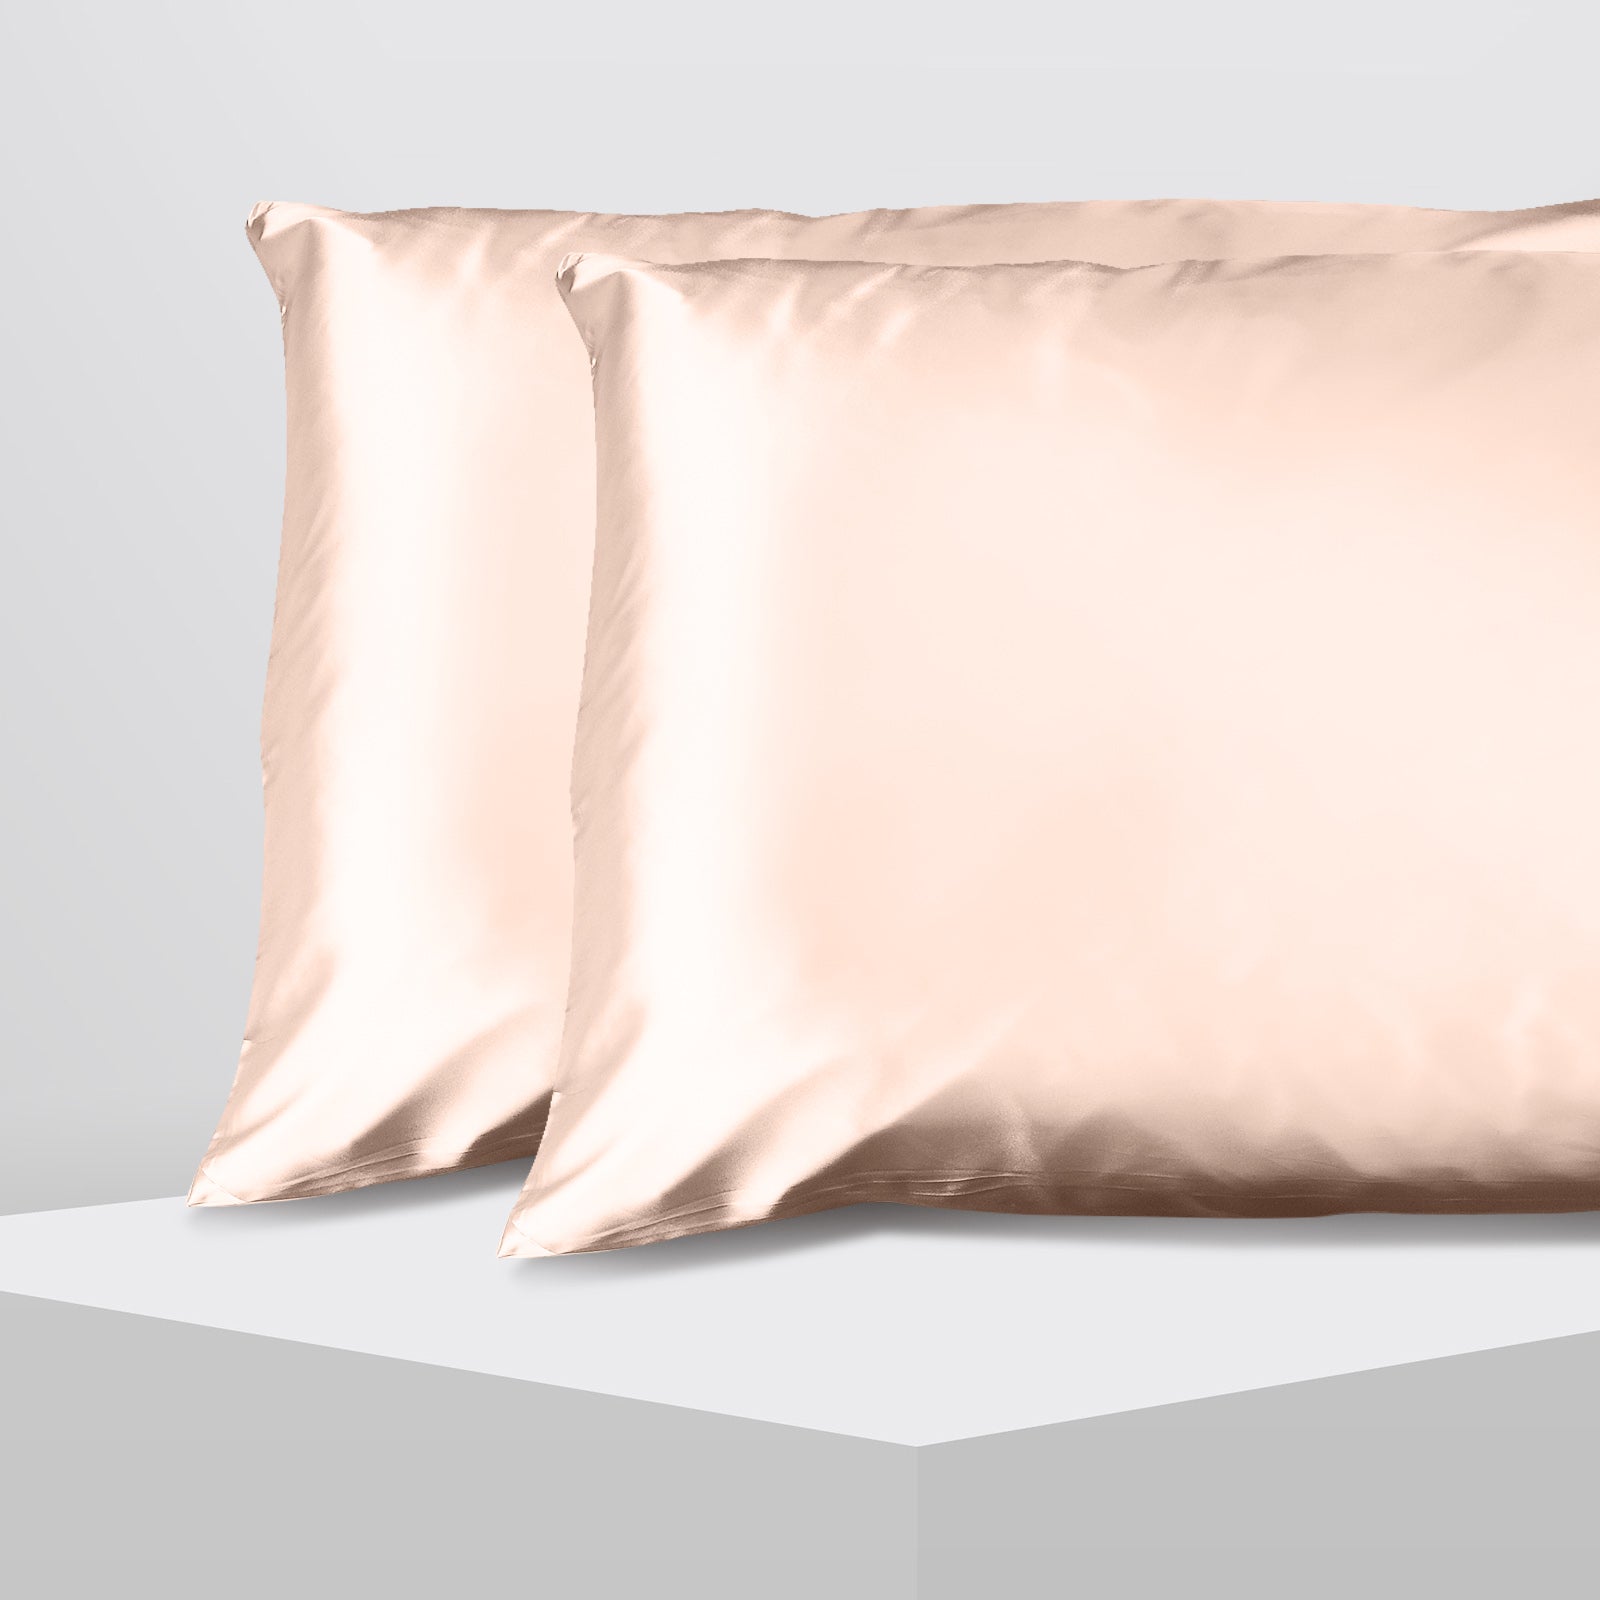 Casa Decor Luxury Satin Pillowcase Twin Pack Size With Gift Box Luxury - Champagne Pink - BM House & Garden